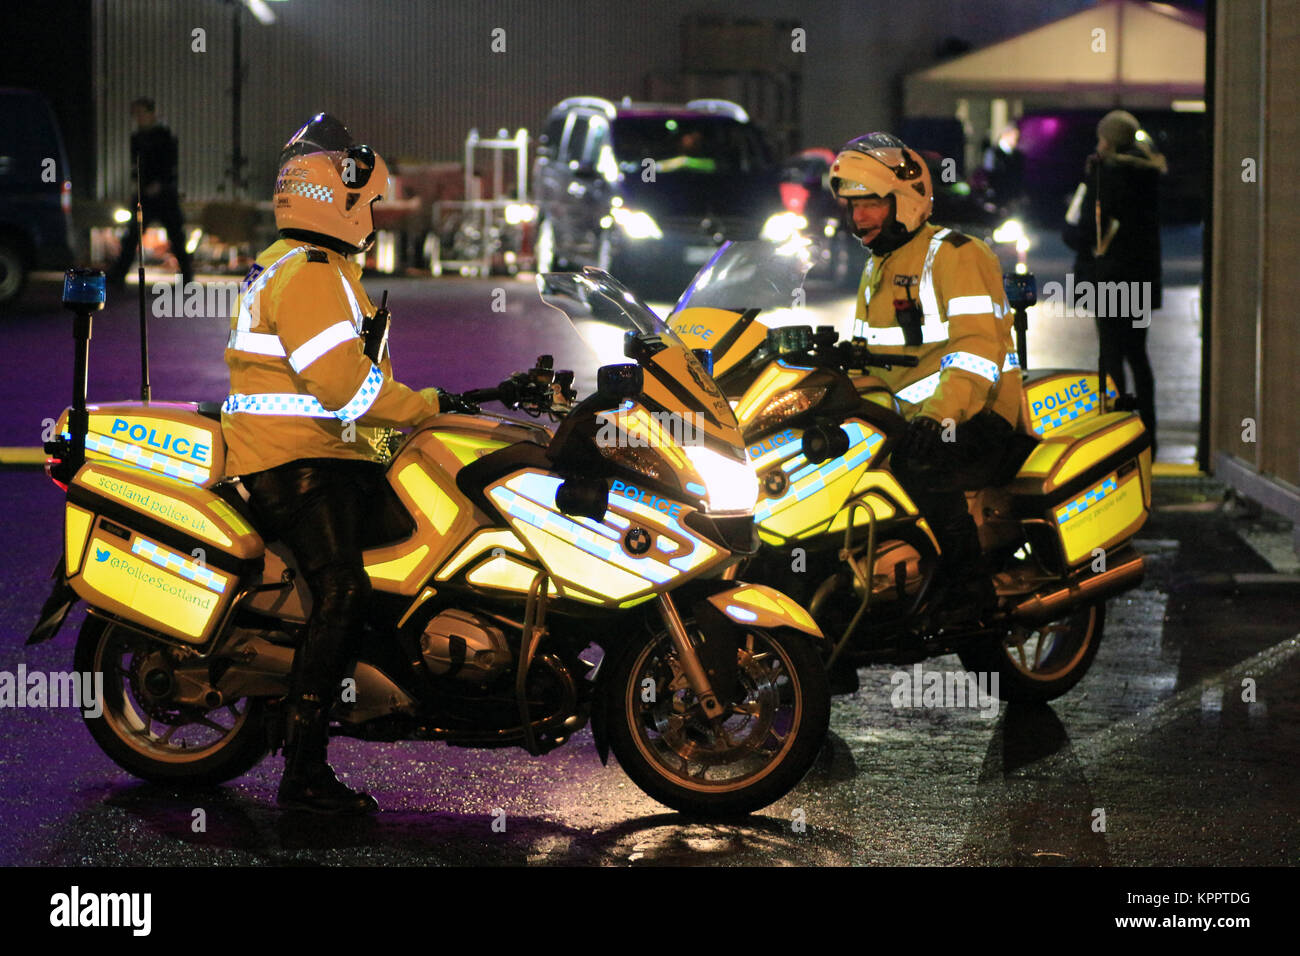 Police Scotland motorcycle officers at the MTV Europe Music Awards (EMA) 2014, held on 9th November, 2014, at The SSE Hydro, Glasgow, Scotland Stock Photo